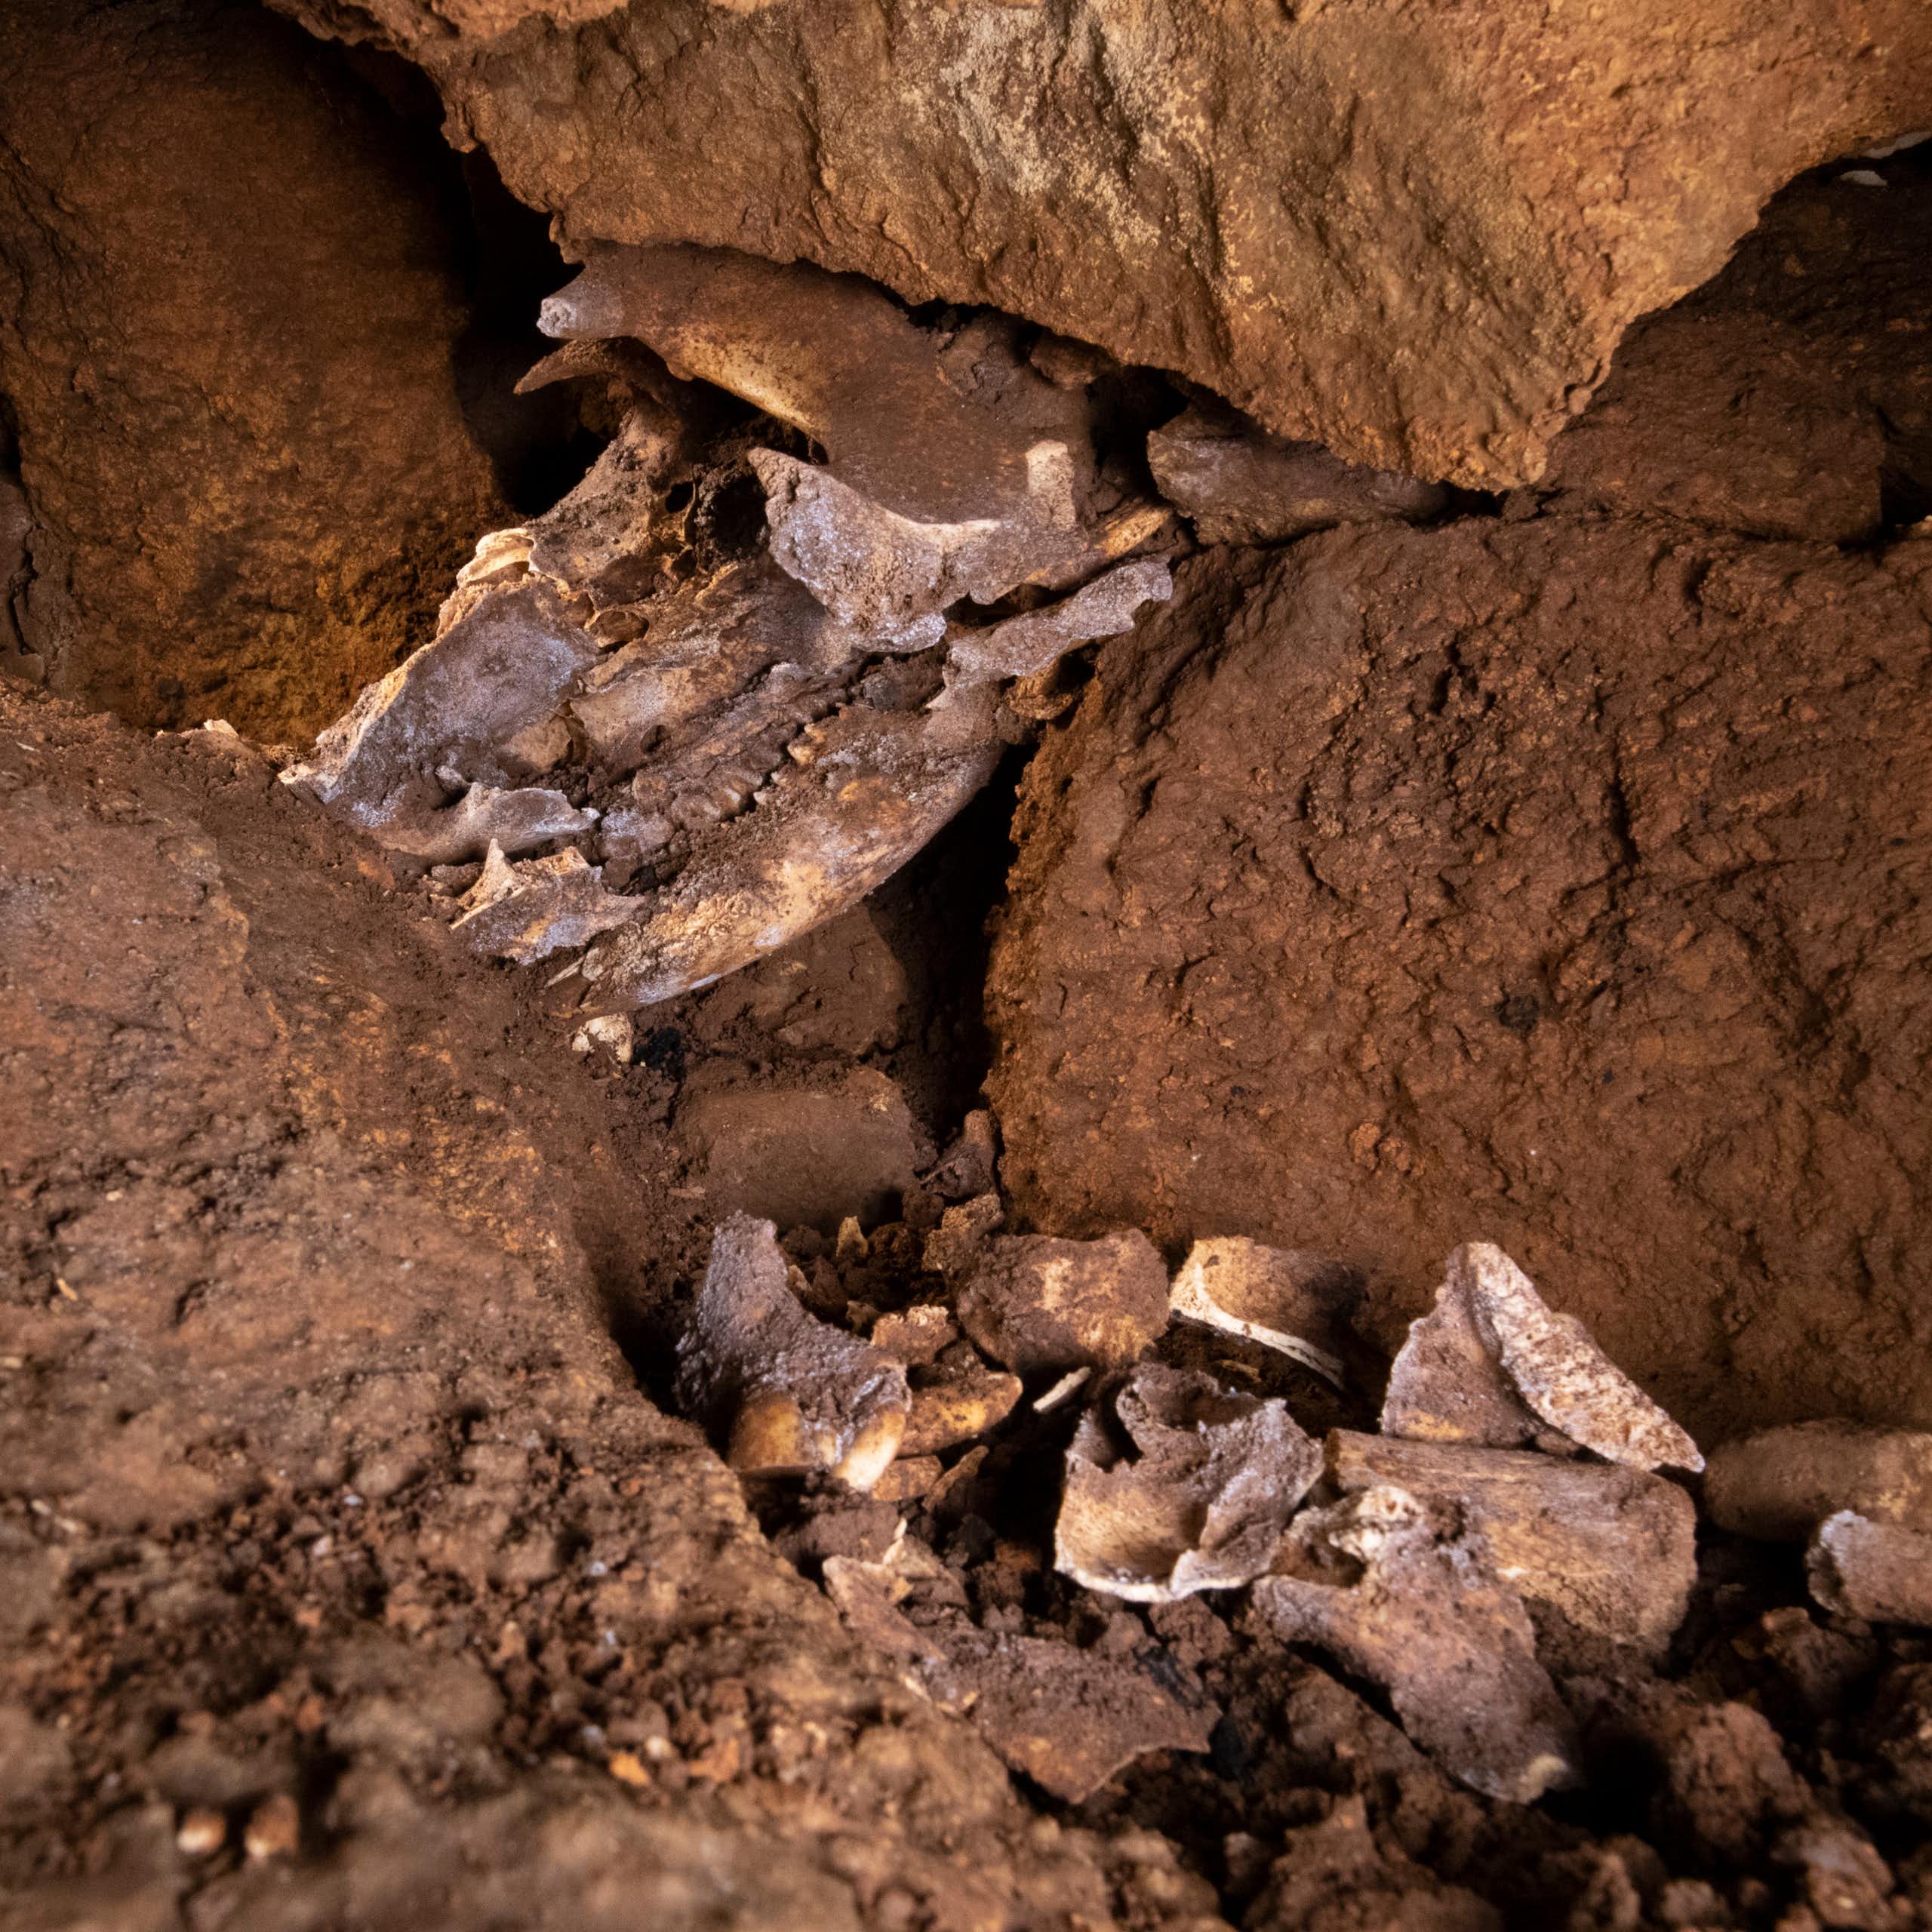 Close-up of bones and a skull sandwiched between brown rocks.